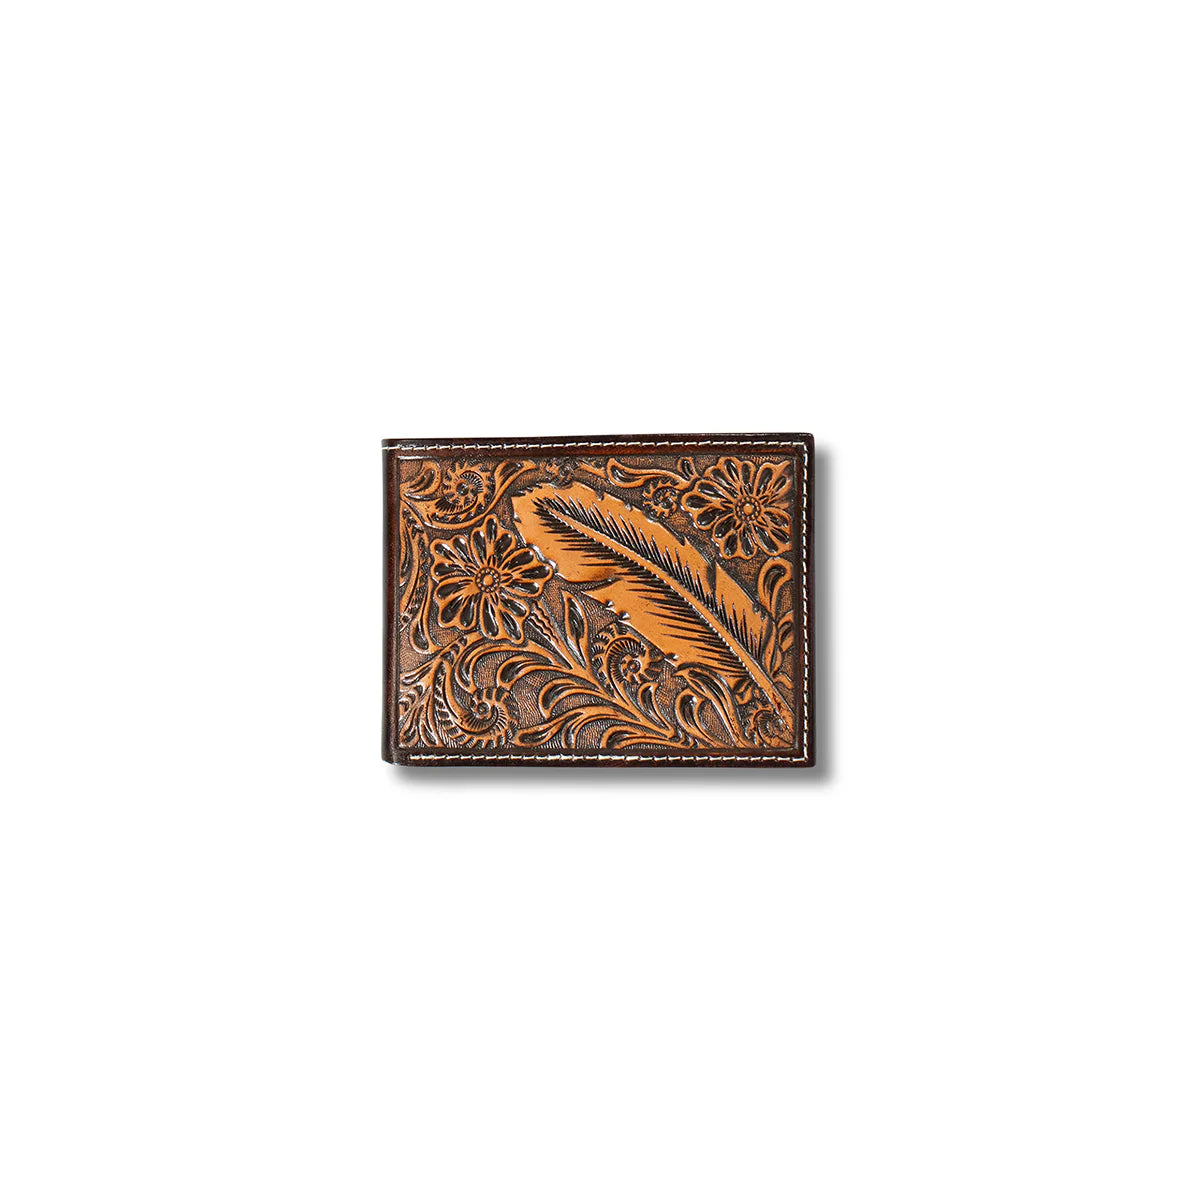 Ariat_Bifold_Feather_Embossed_BR_prd_85298_s_a35576021.webp